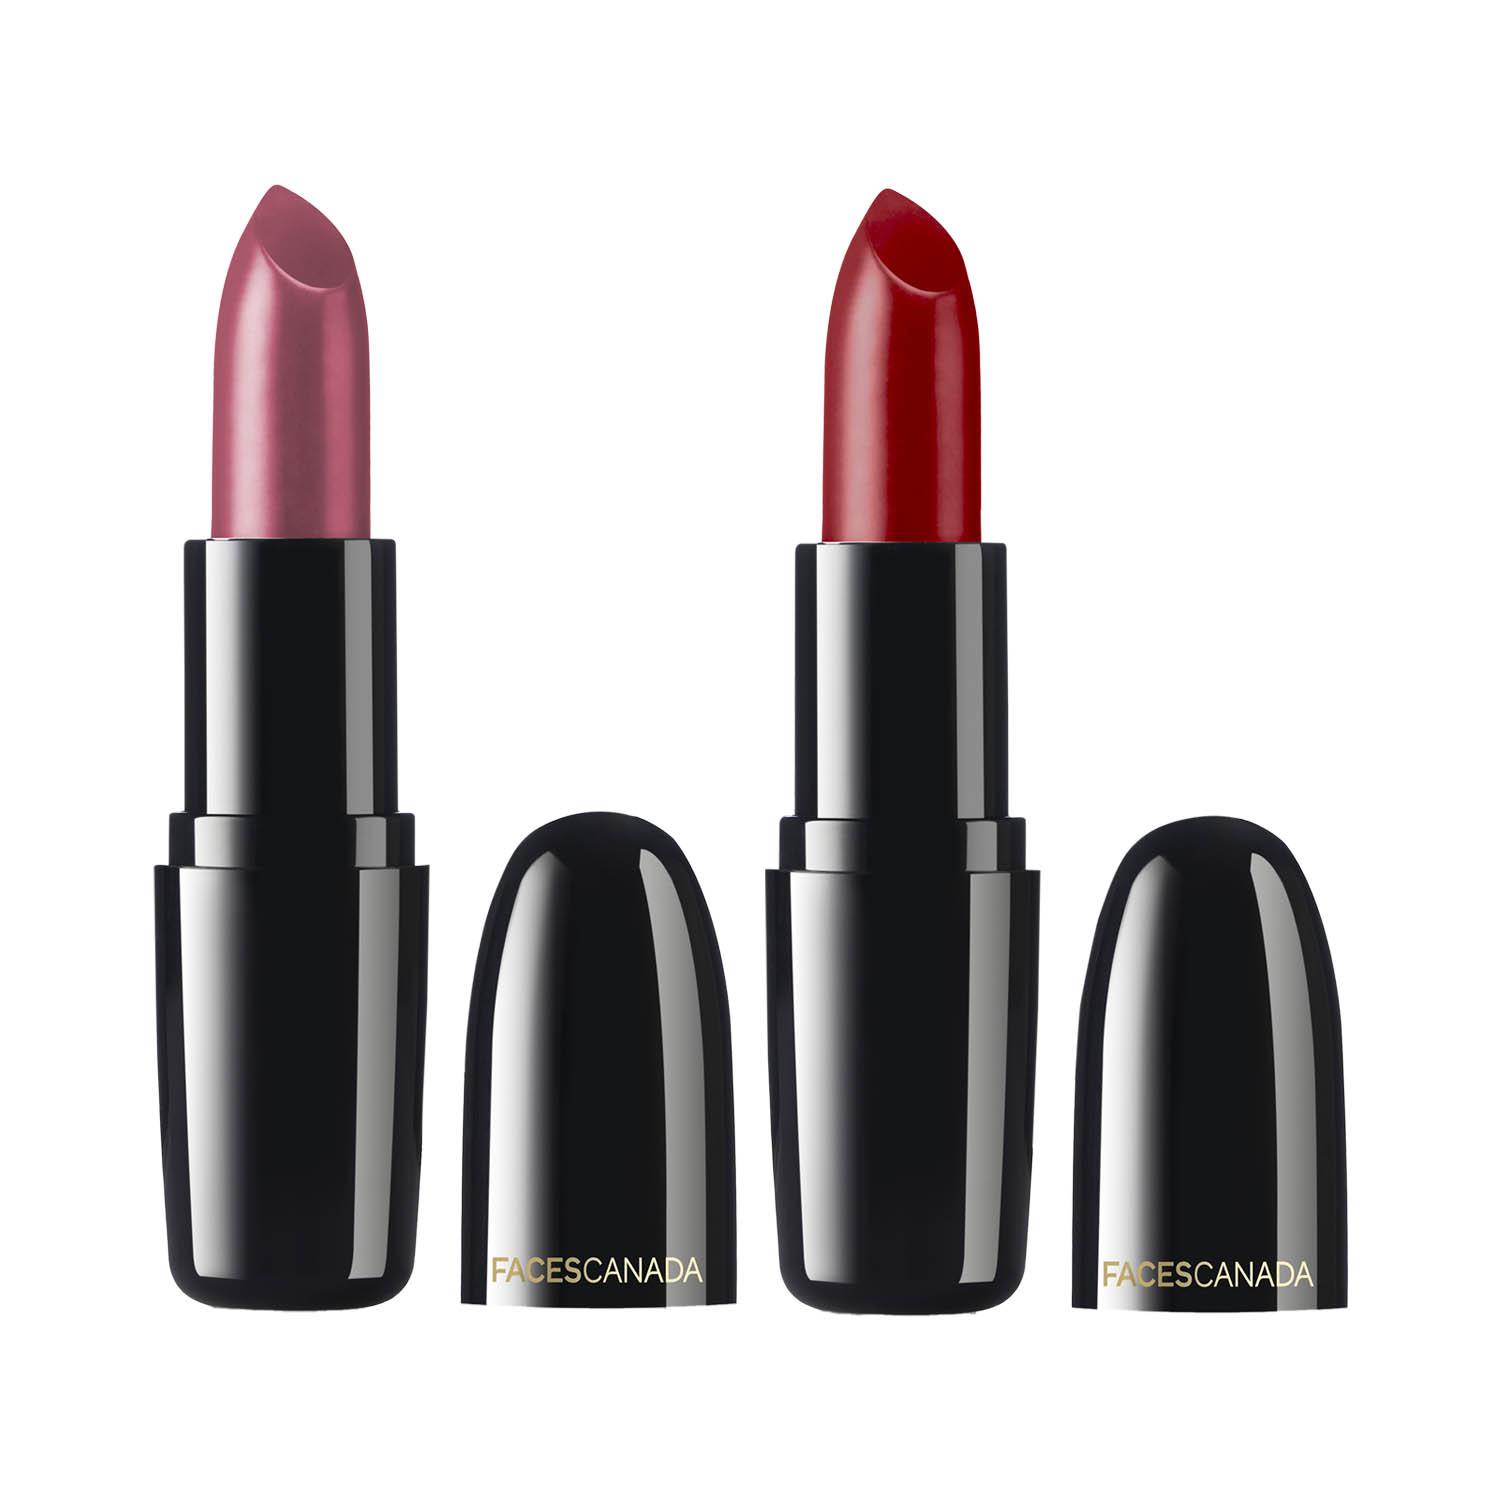 Faces Canada | Faces Canada Weightless Creme Finish Lipstick - Rock Solid and Rosewood (4g x 2) Combo